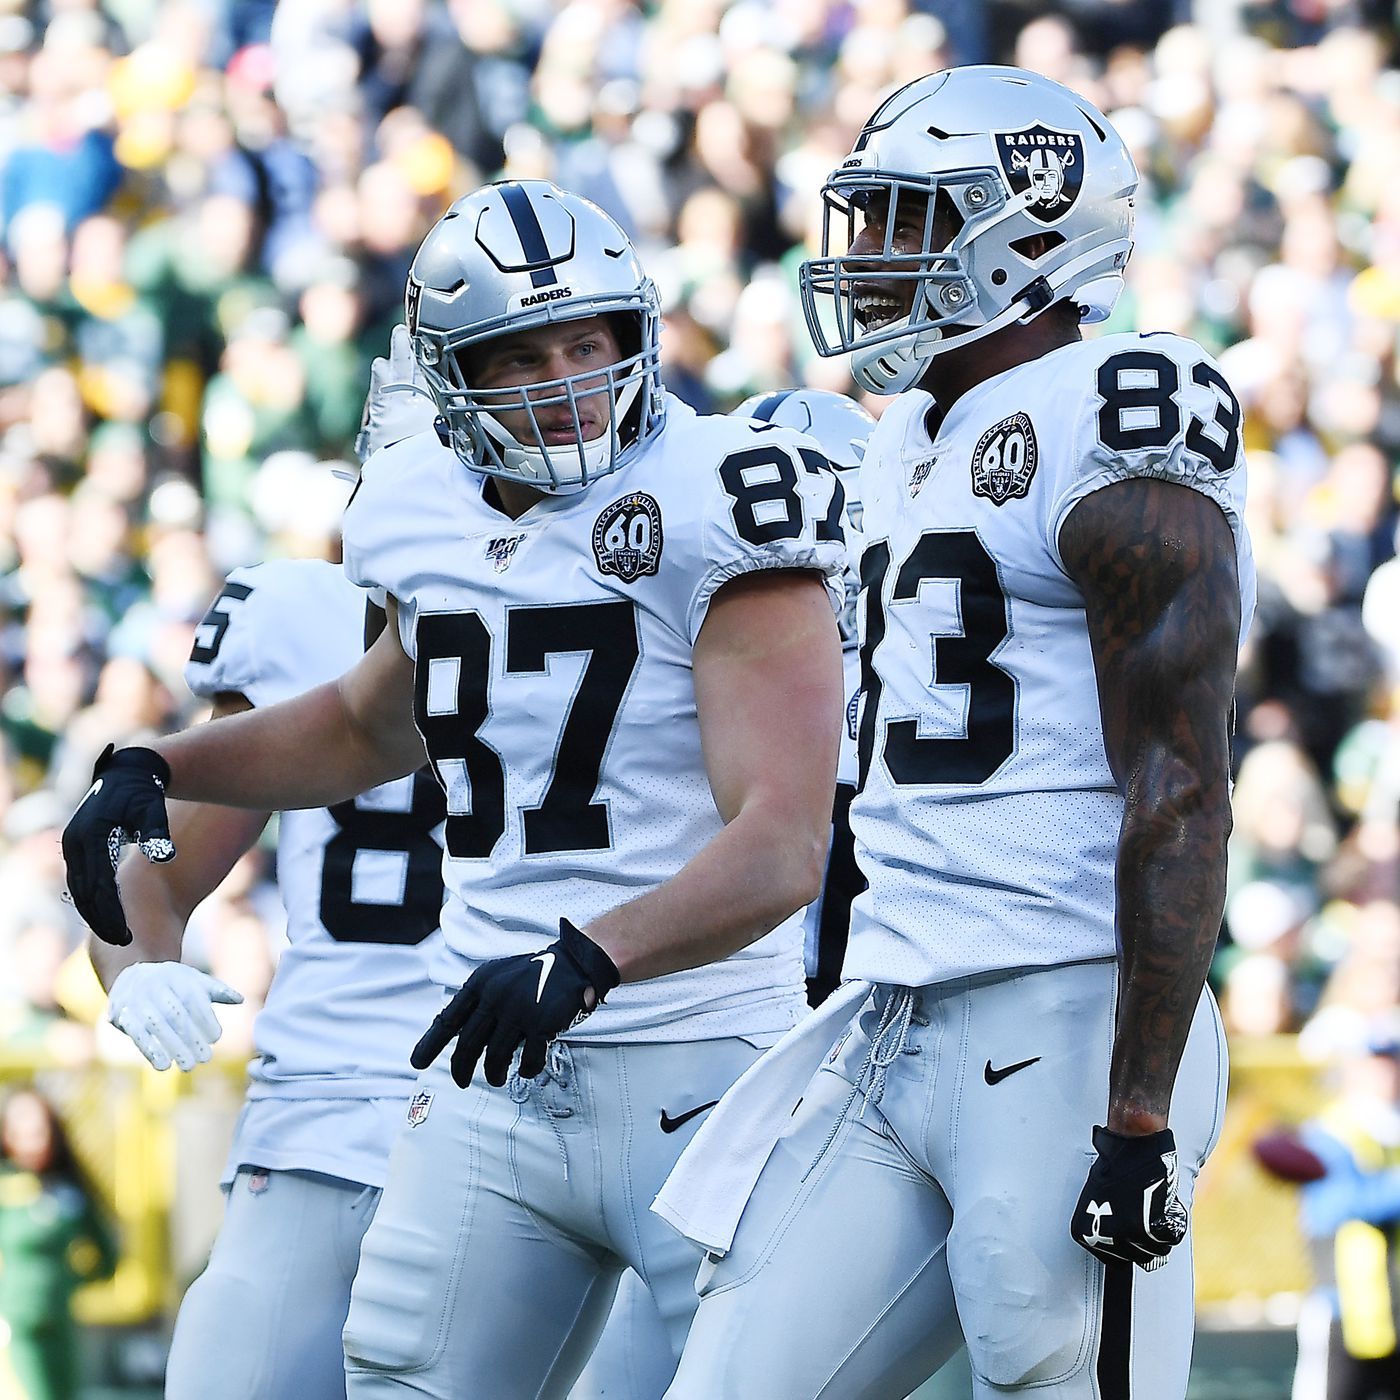 Darren Waller transformed the Raiders' tight ends into the NFL's best